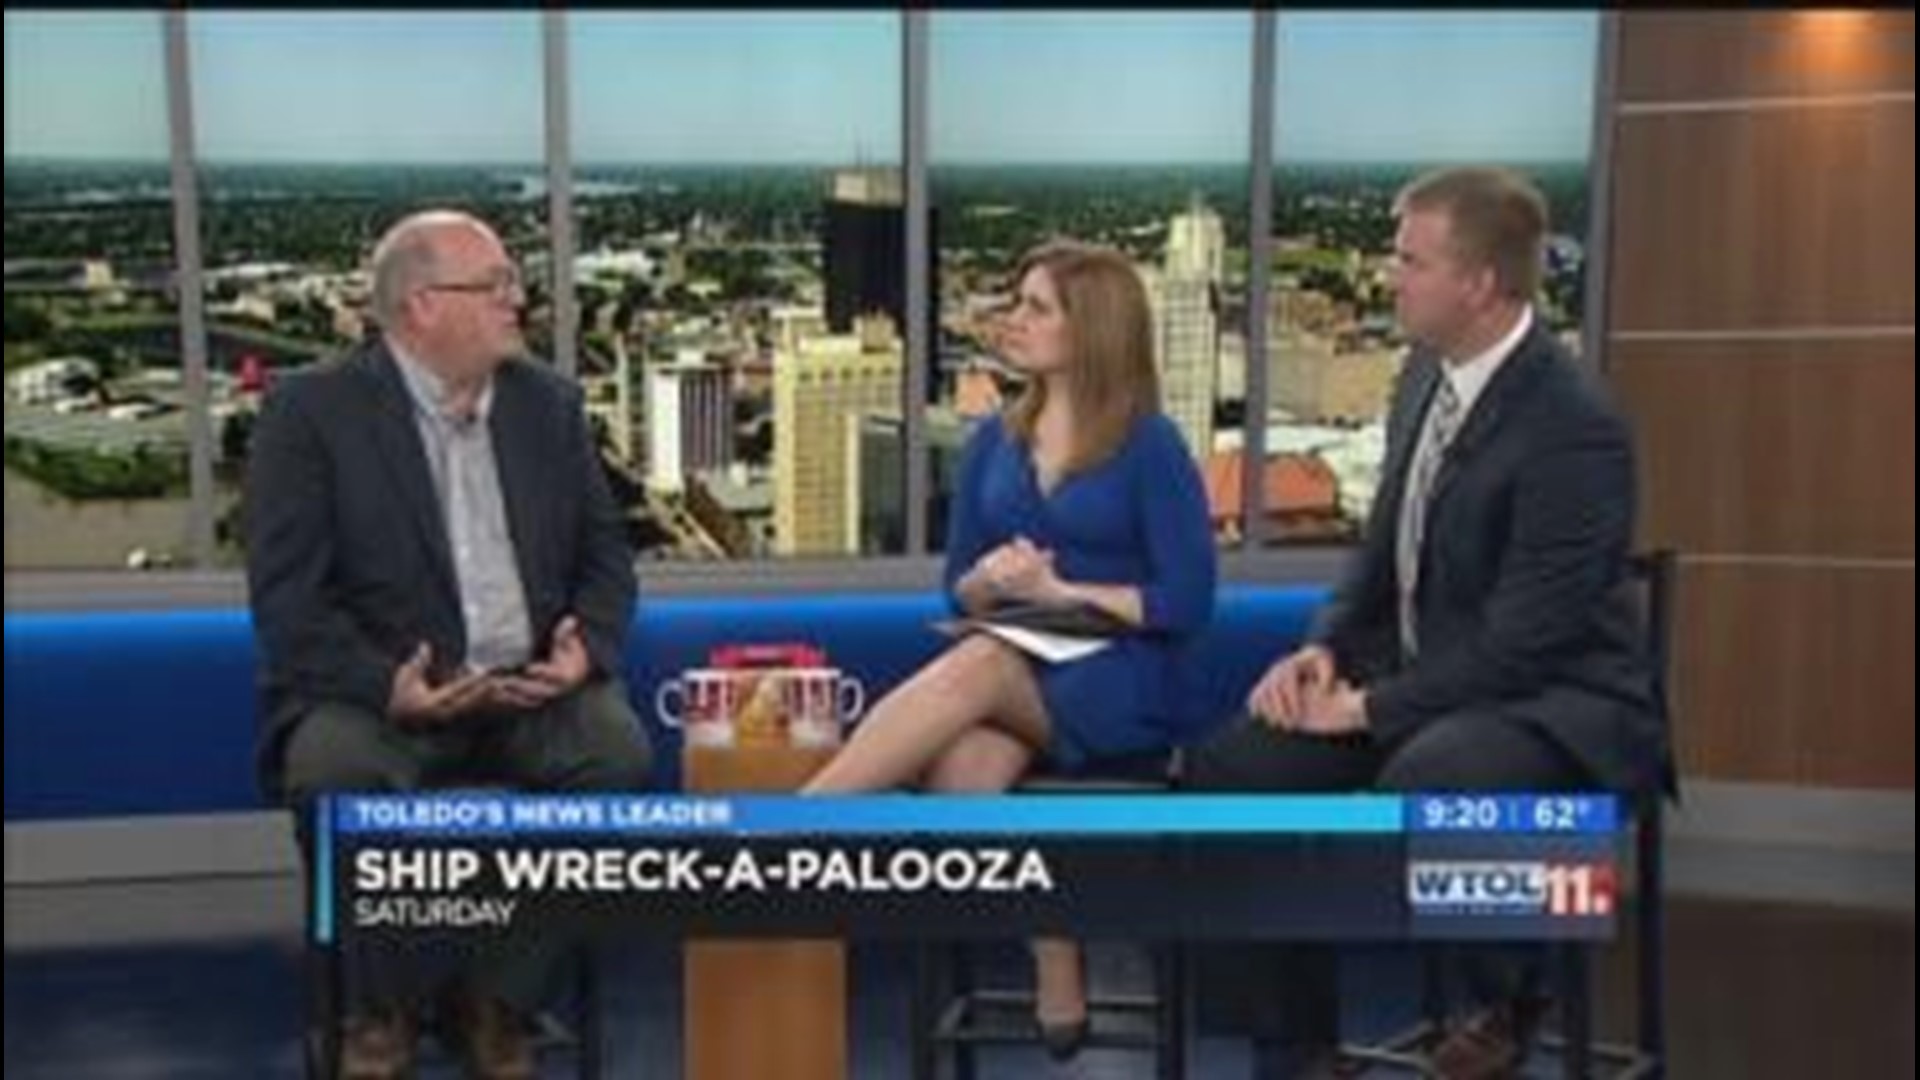 Ship-wreck-a-palooza on WTOL 11 Your Day